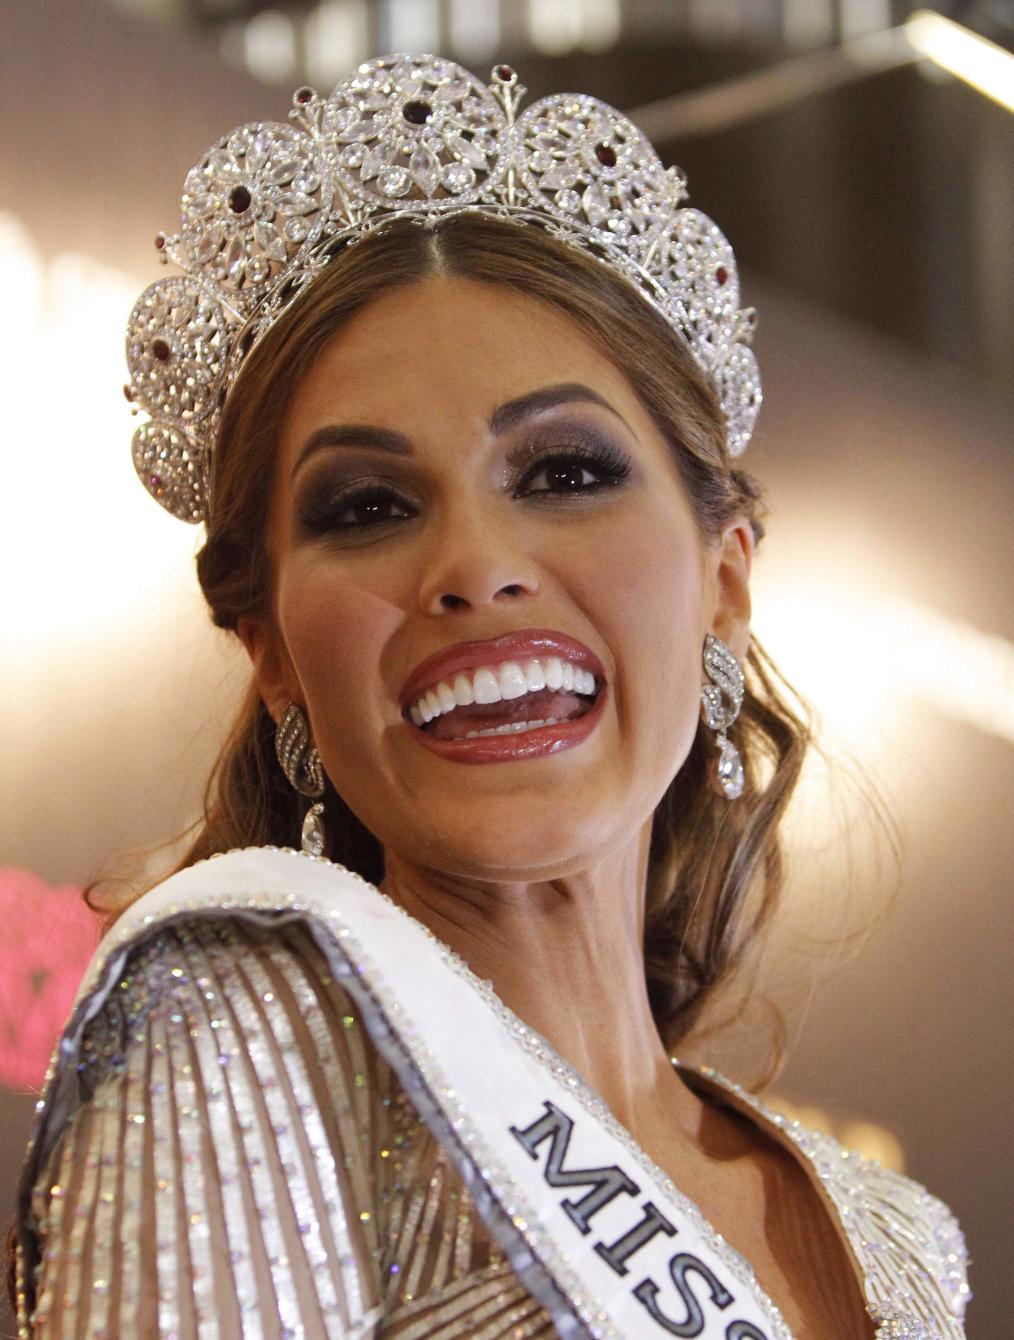 Miss Venezuela Gabriela Isler reacts at a news conference after winning the Miss Universe 2013 pageant in Moscow